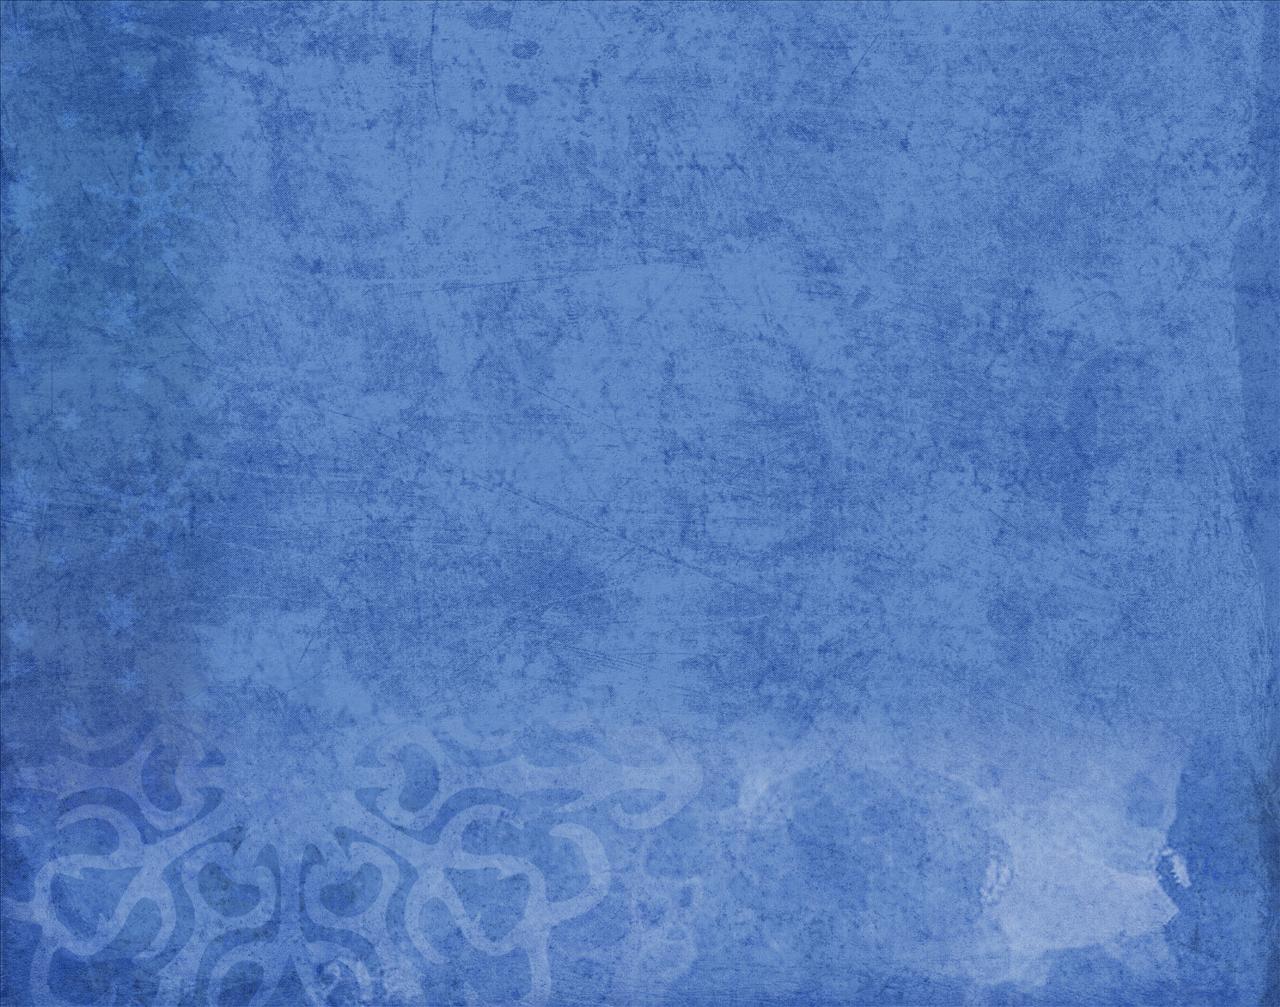 Blue Snowflakes Backgrounds